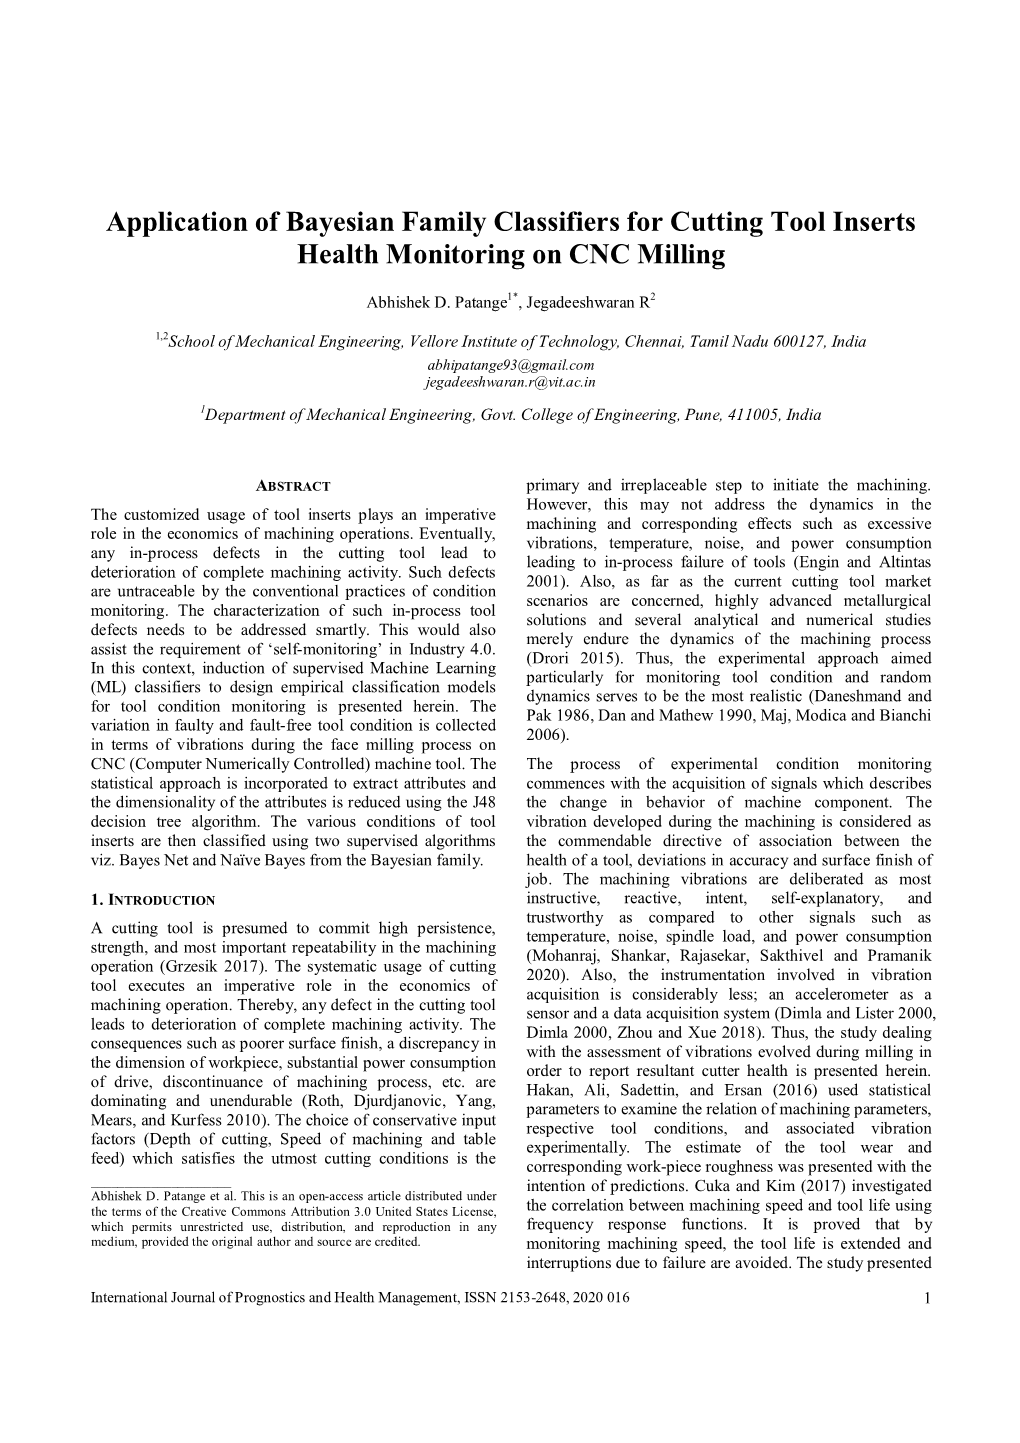 Application of Bayesian Family Classifiers for Cutting Tool Inserts Health Monitoring on CNC Milling